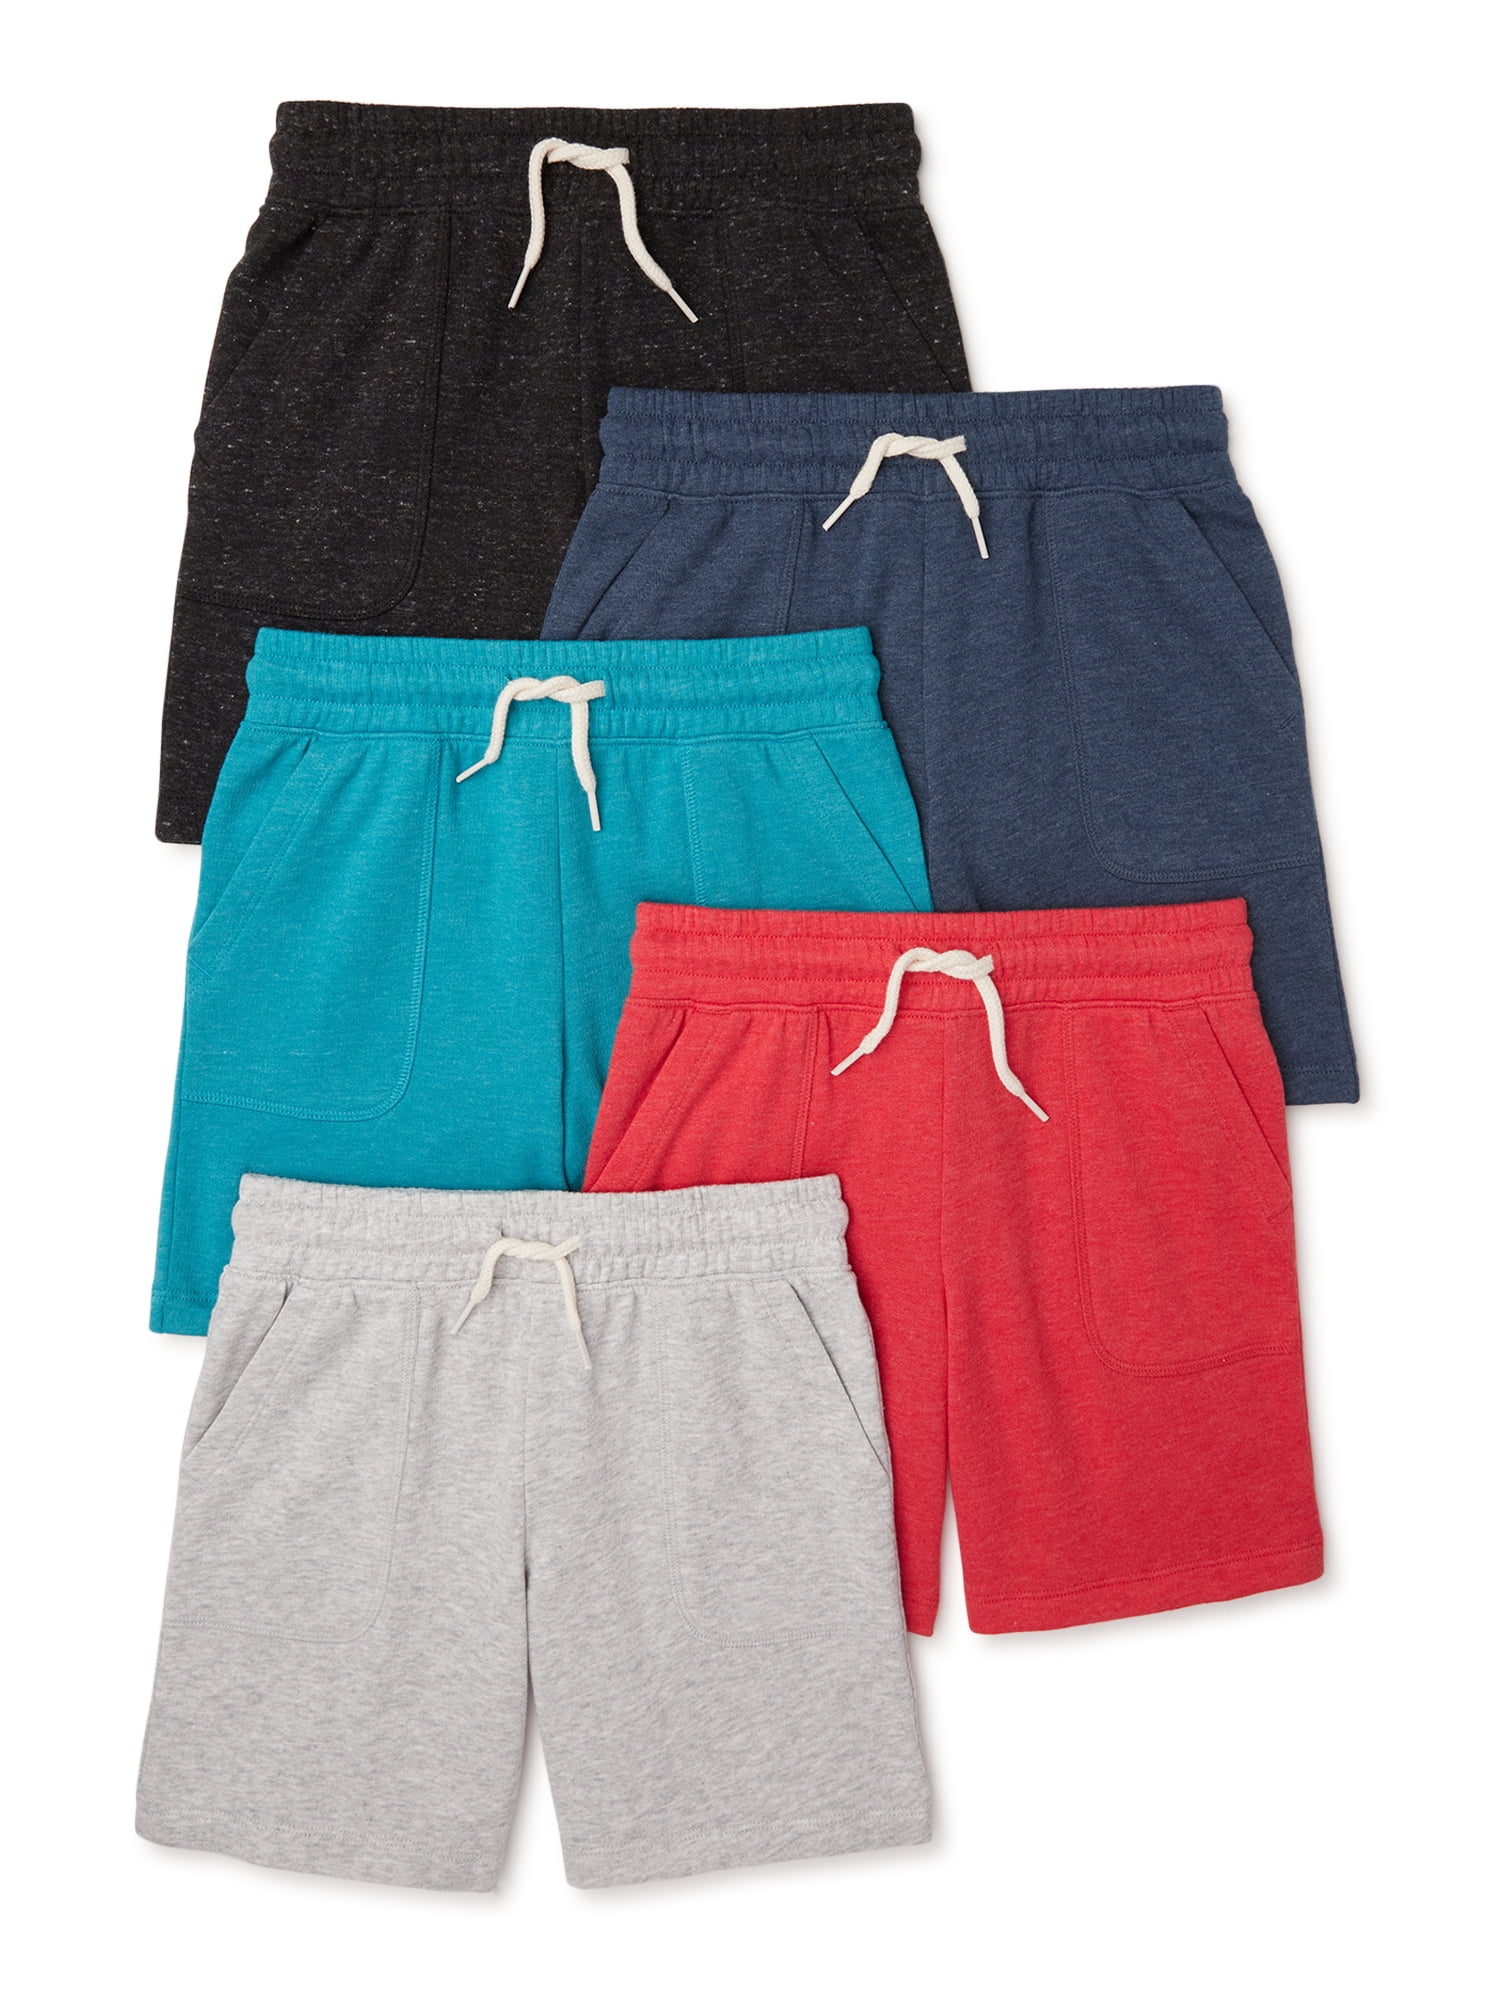 Kid Nation Boys Pull on Stretch Sport Shorts 4-12 Years 